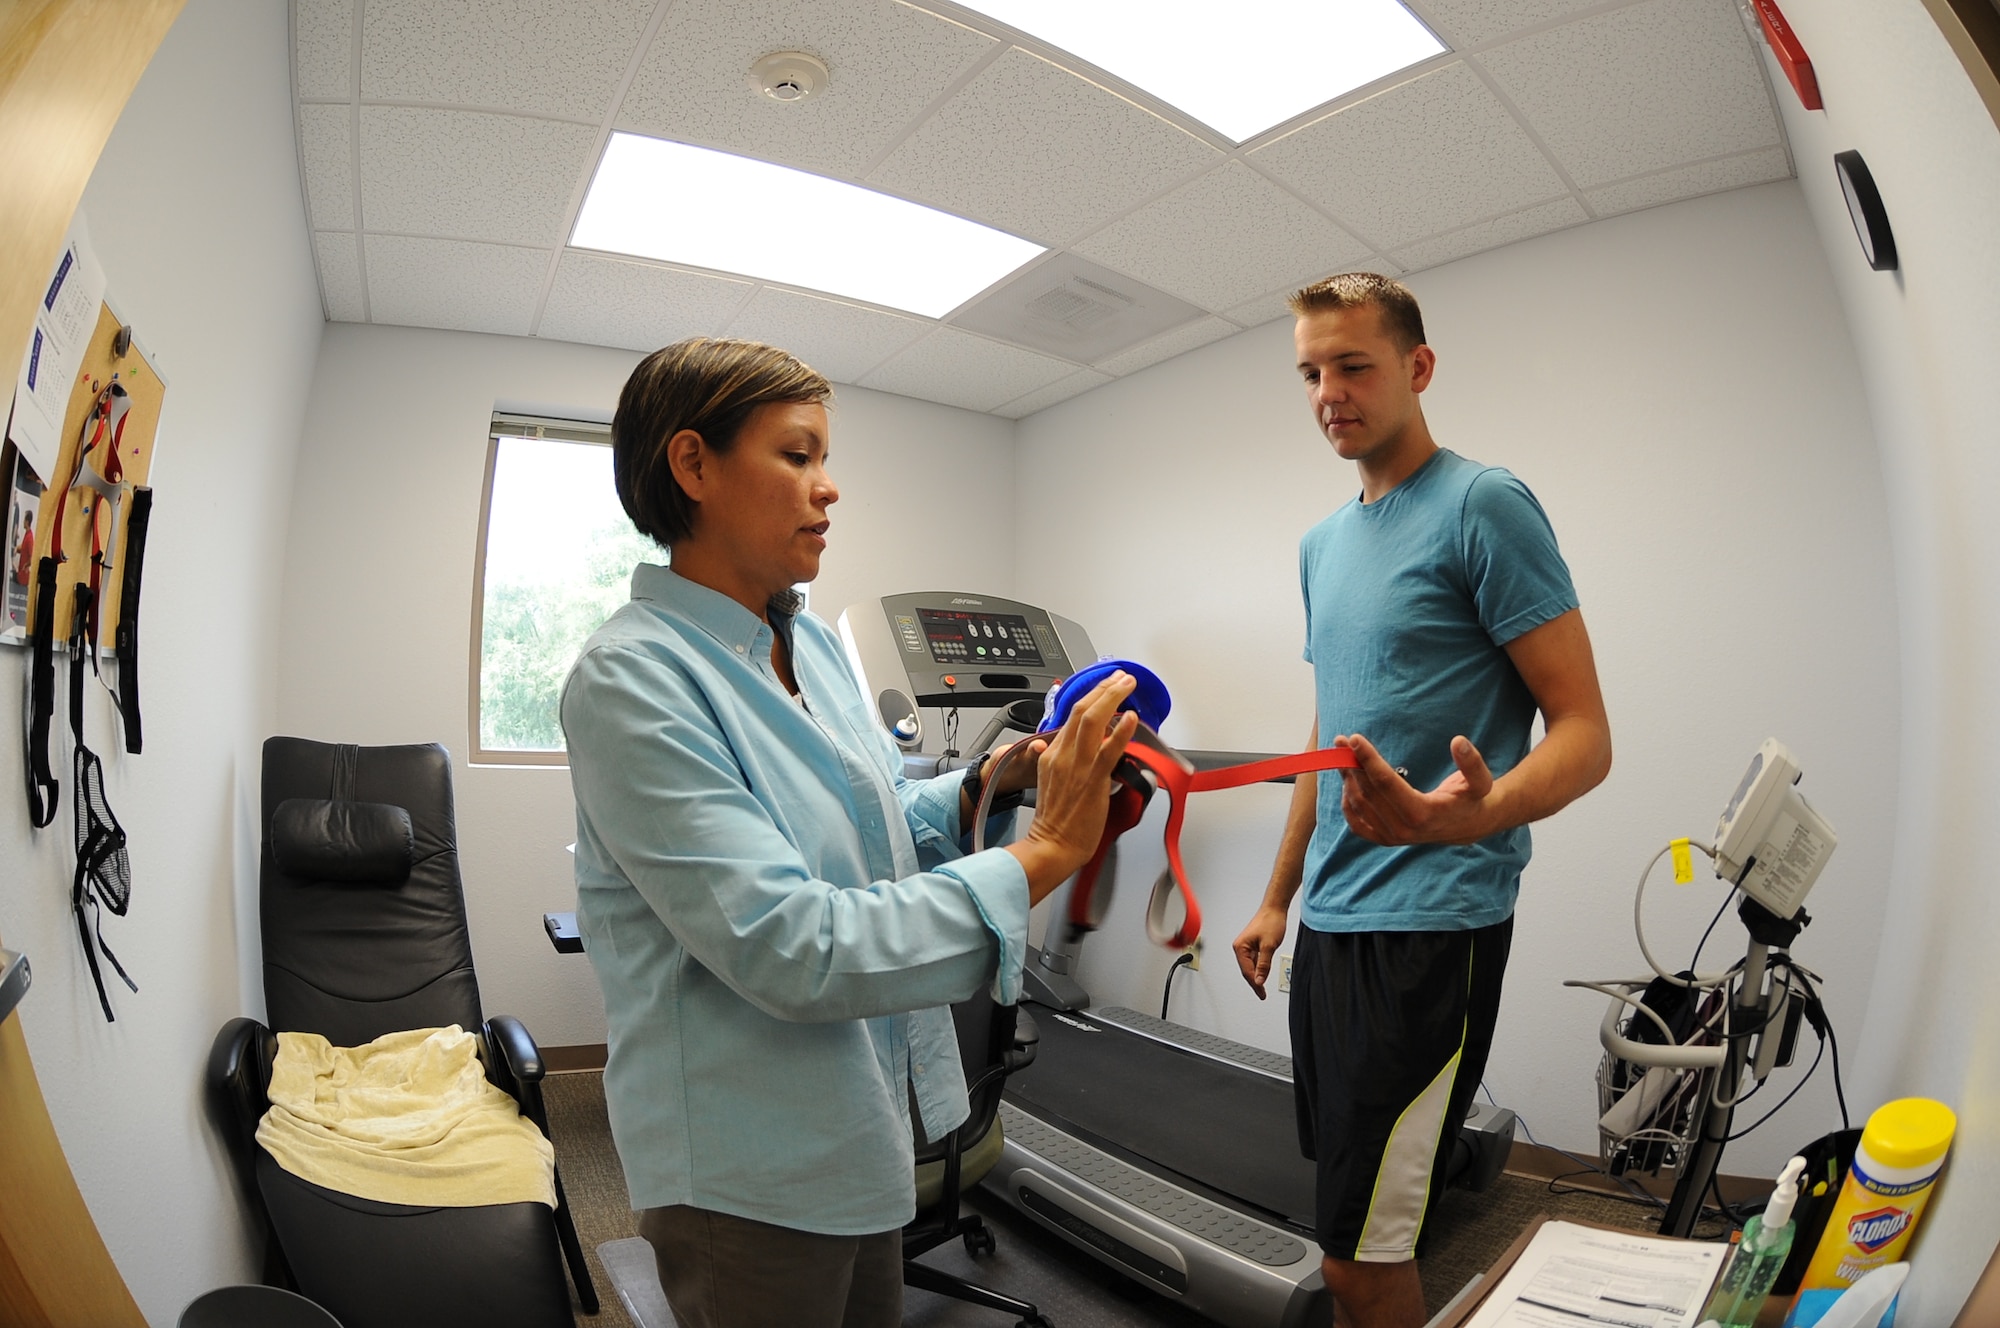 Lana R. Fred, Davis-Monthan Air Force Base Health and Wellness Center program coordinator, instructs U.S. Air Force Senior Airman Yevgeniy Sokolov, 355th Aircraft Maintenance Squadron crew chief, how to wear a VO2 max facemask at Davis-Monthan AFB, Ariz., Sept. 2, 2015. The mask covers both the mouth and nose while it measures the body’s oxygen intake though a tube connected to both the facemask and computer. (U.S. Air Force photo by Airman 1st Class Ashley N. Steffen/Released)